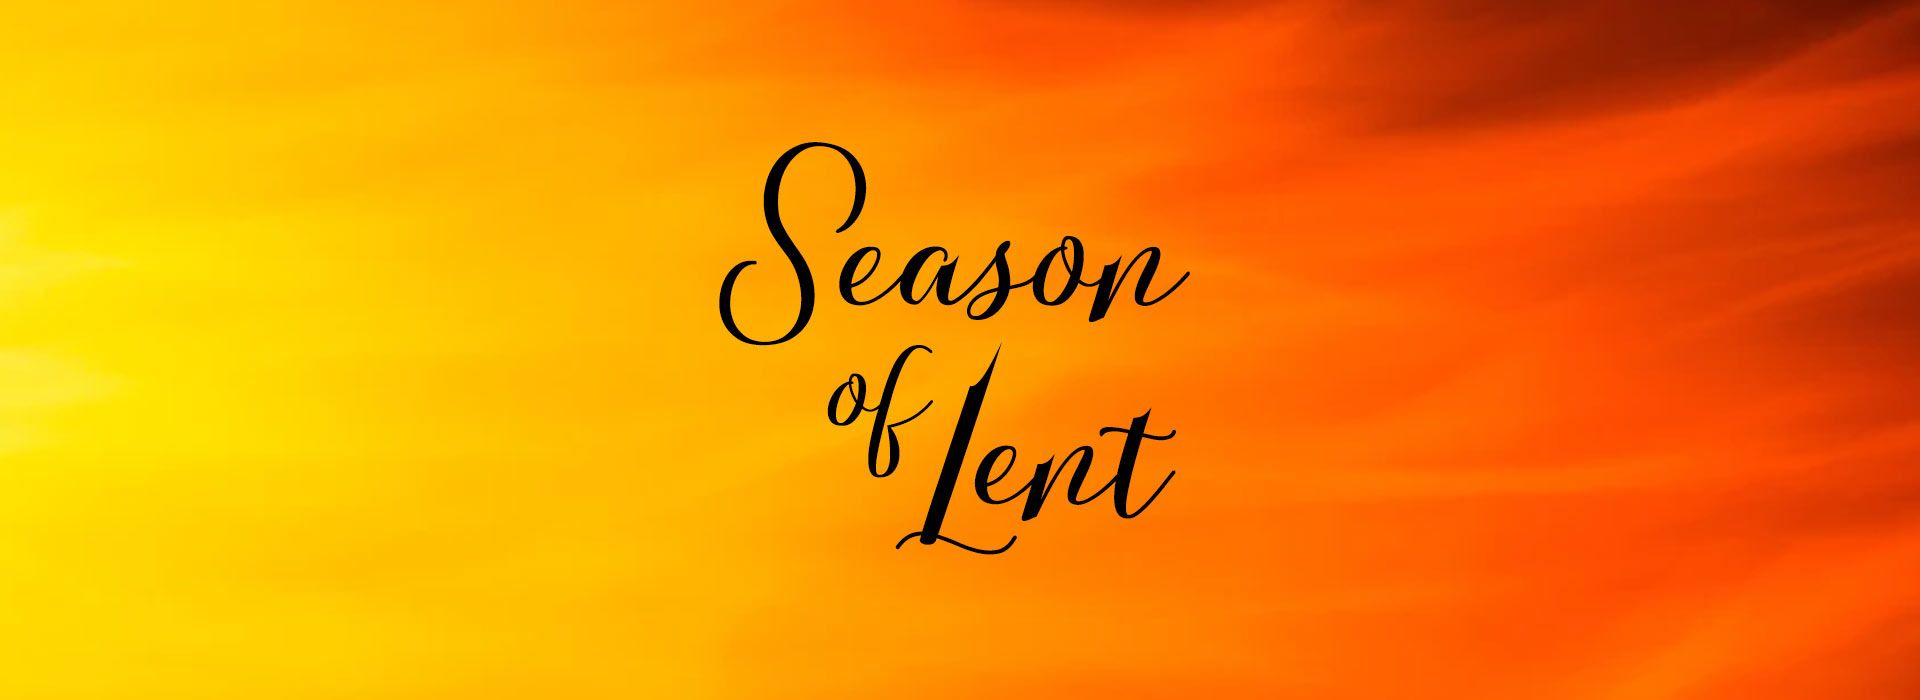 FIRST SUNDAY OF LENT